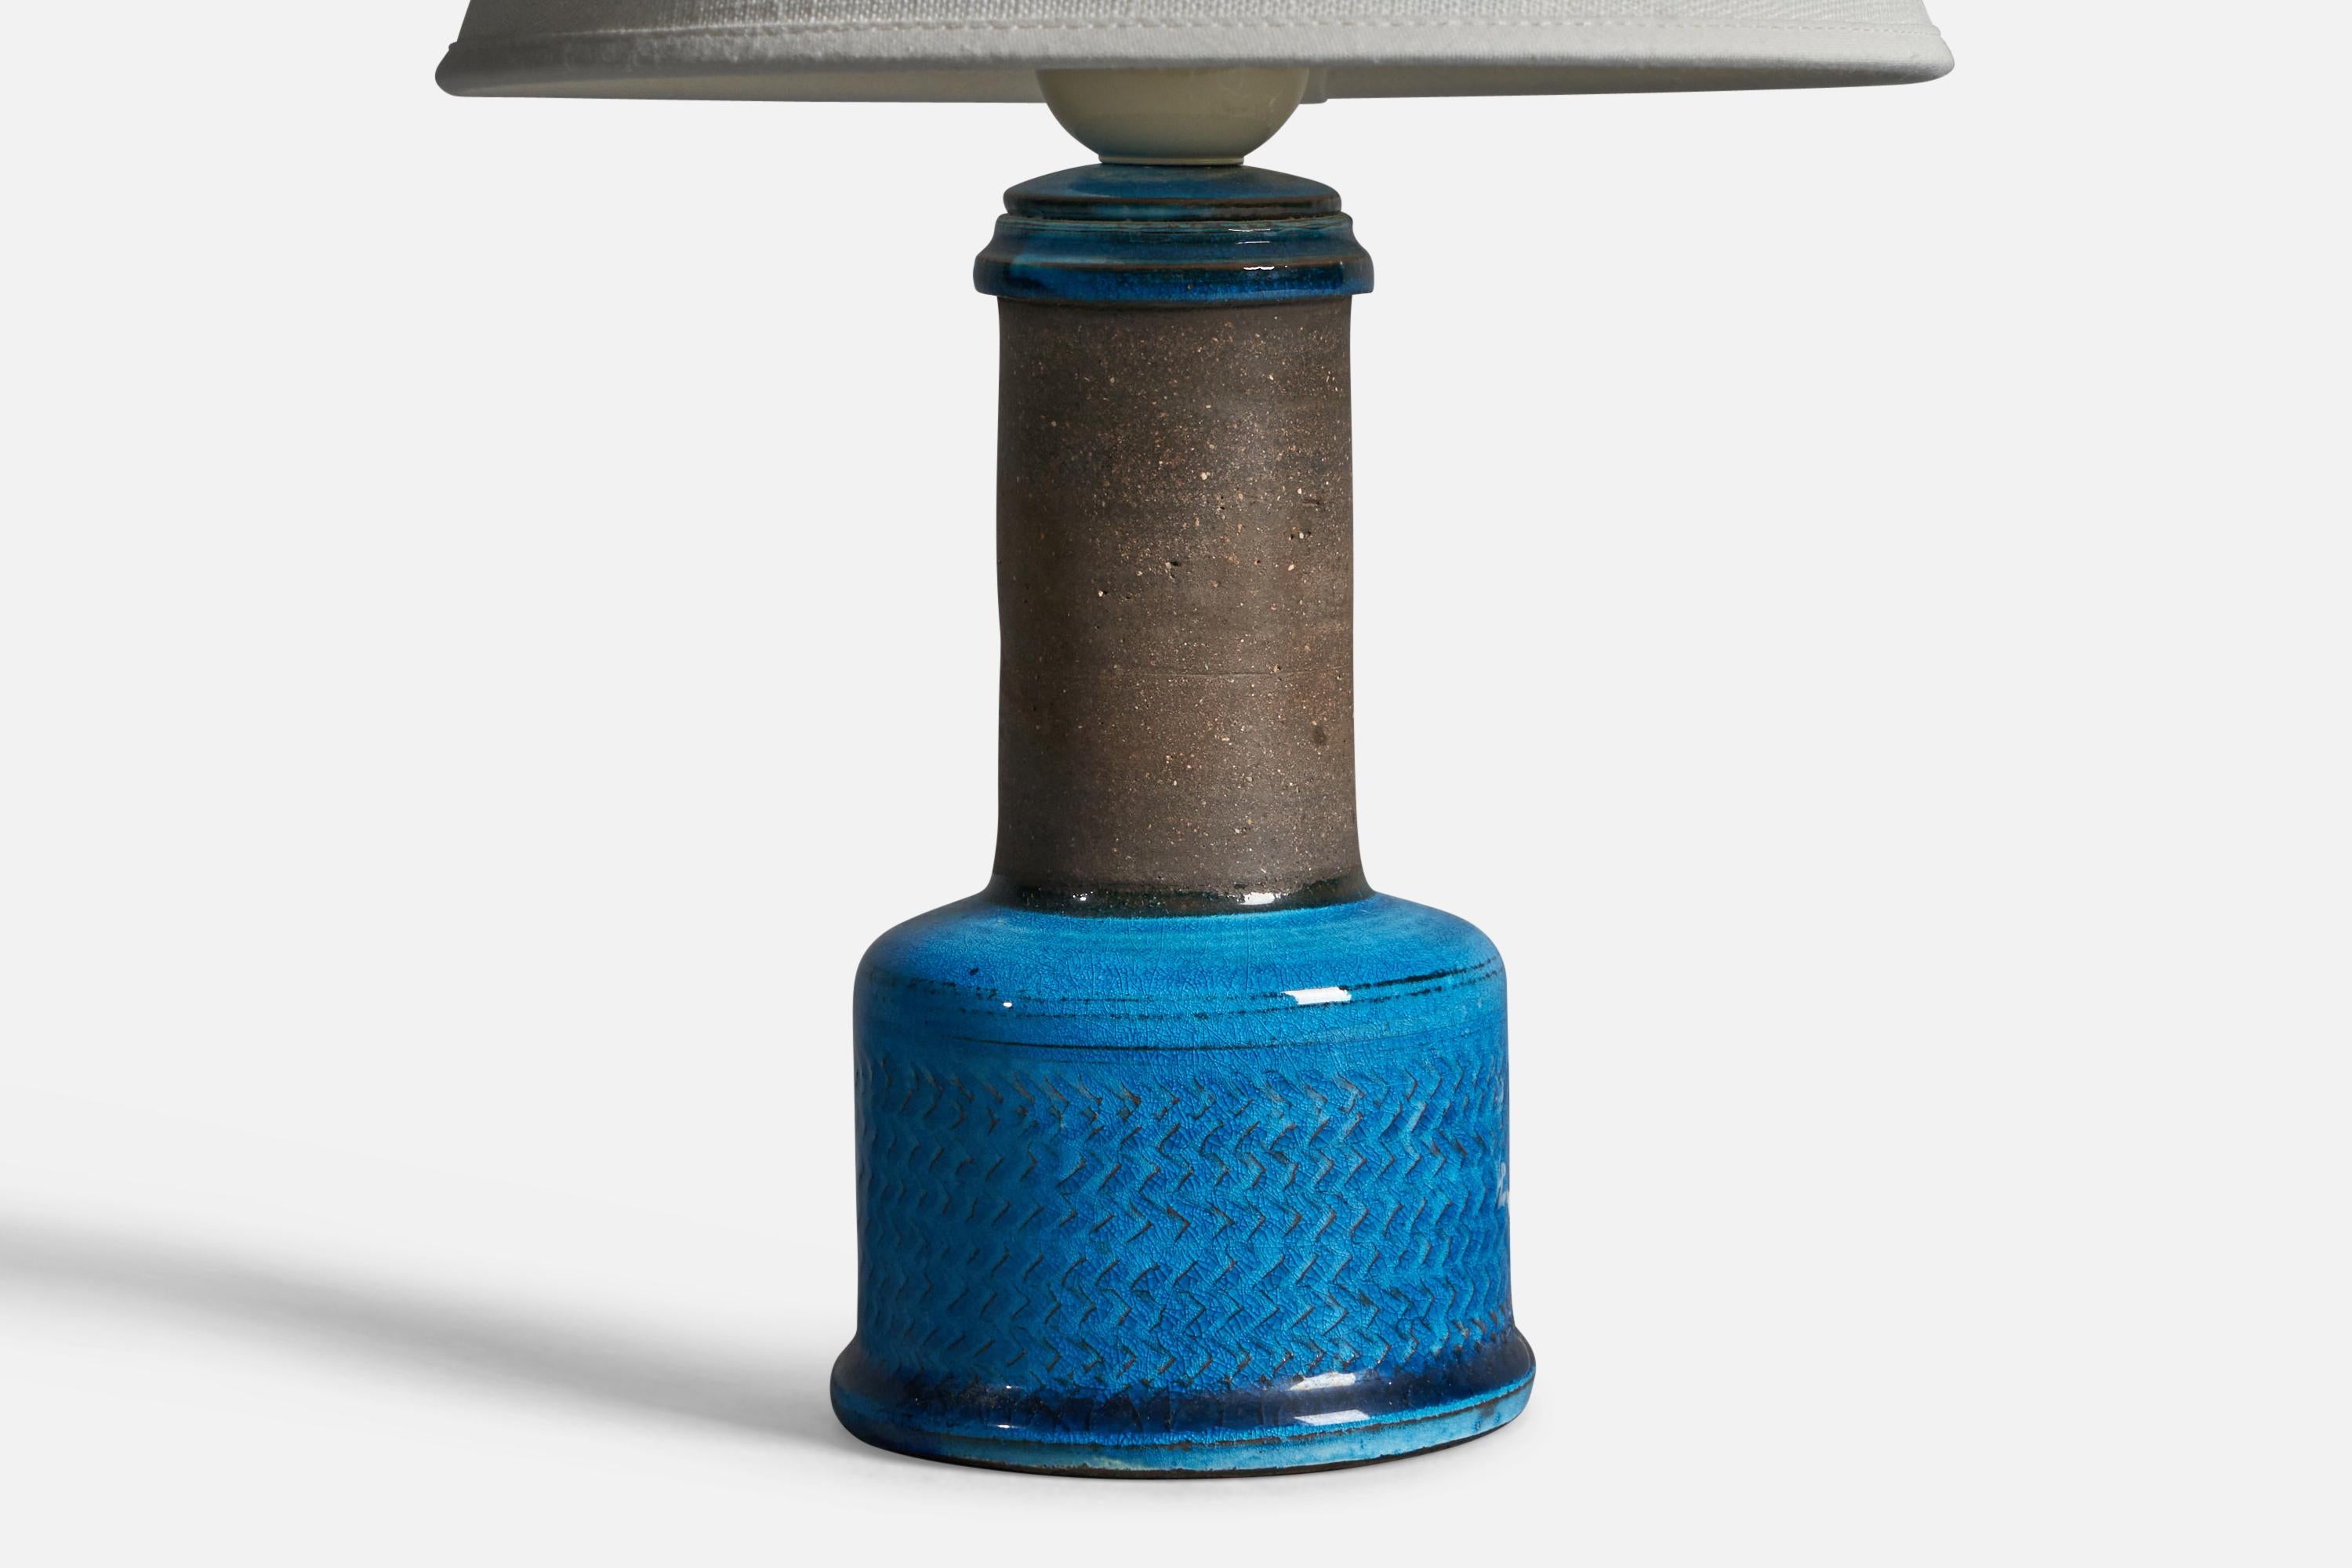 A blue and brown-glazed ceramic table lamp designed and produced by Kähler, Denmark, 1960s. 

Dimensions of Lamp (inches): 9